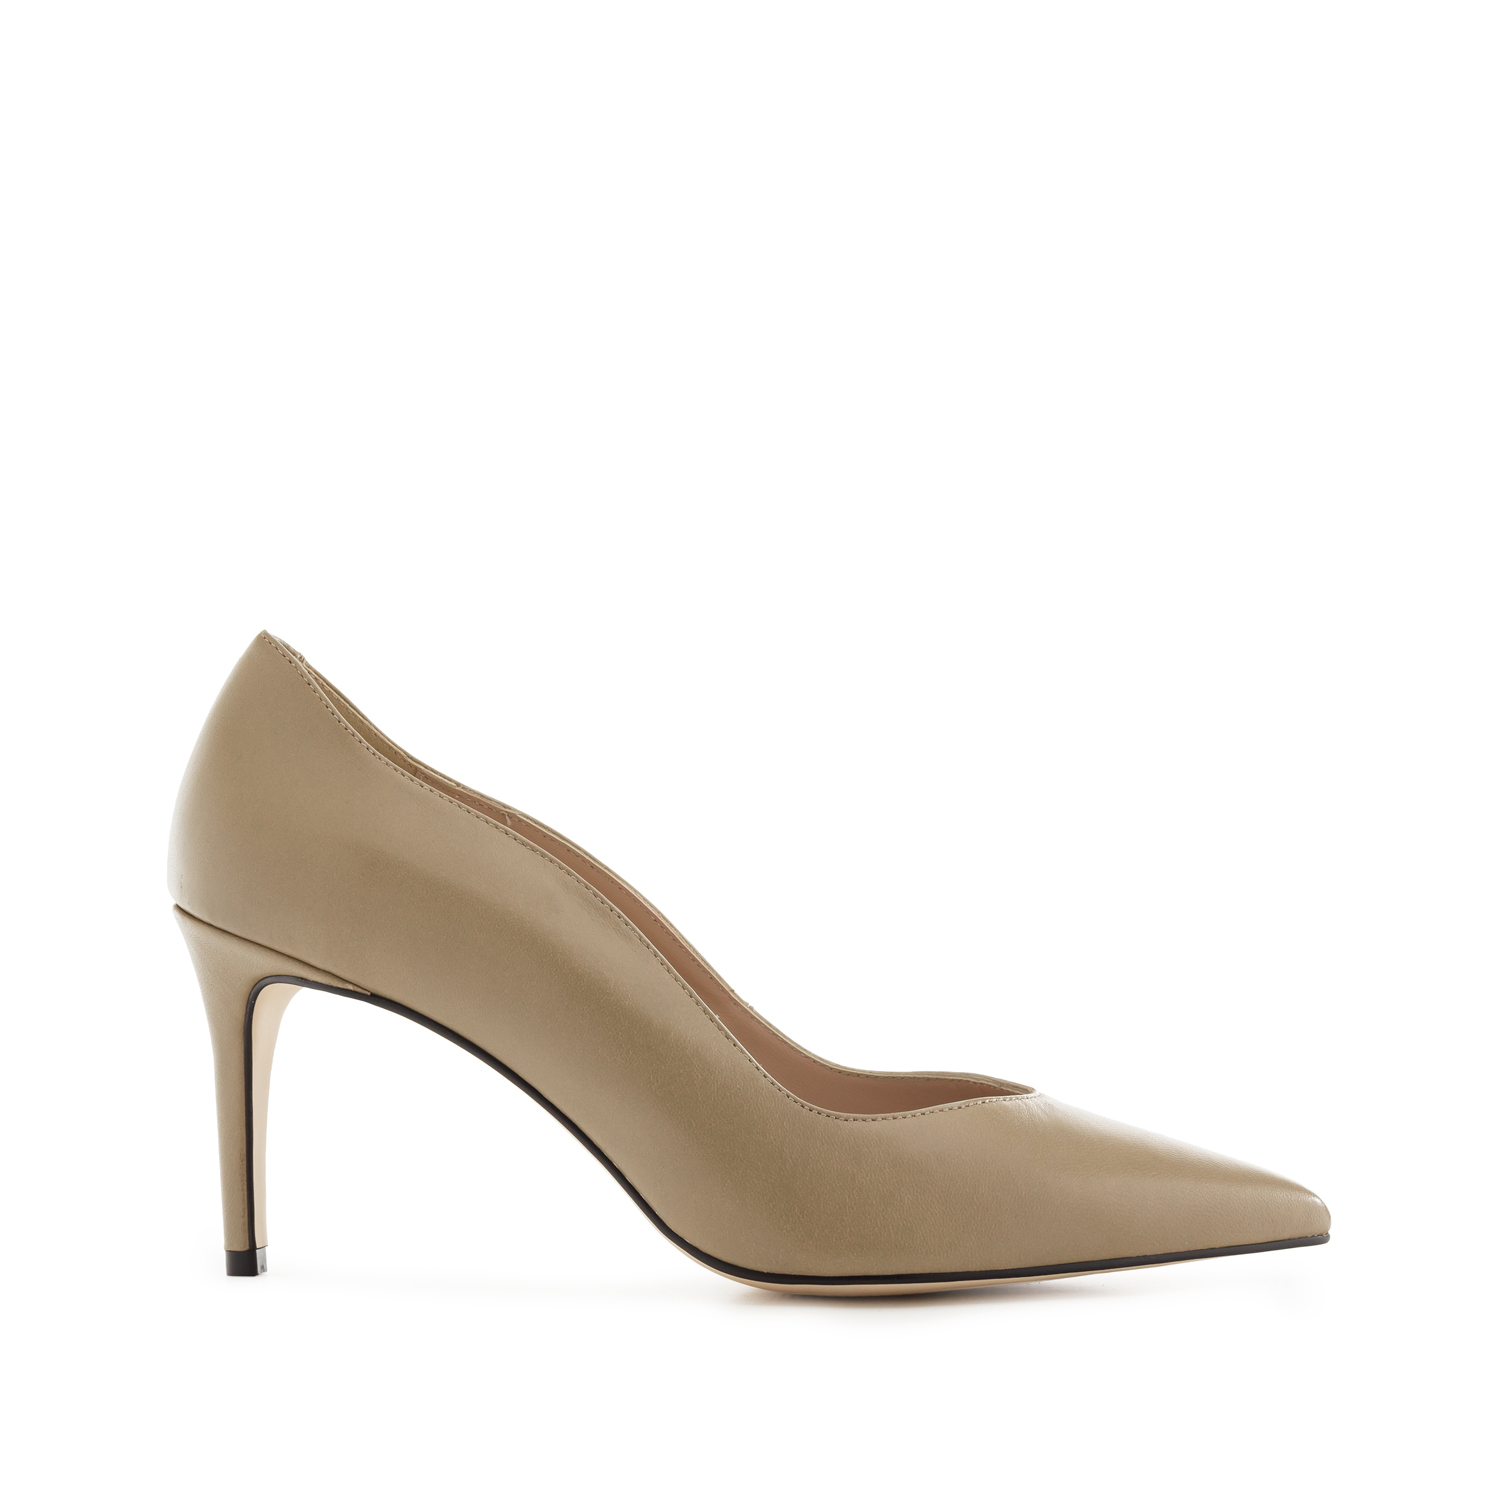 Waved Upper Stilettos in Earth Nappa Leather 